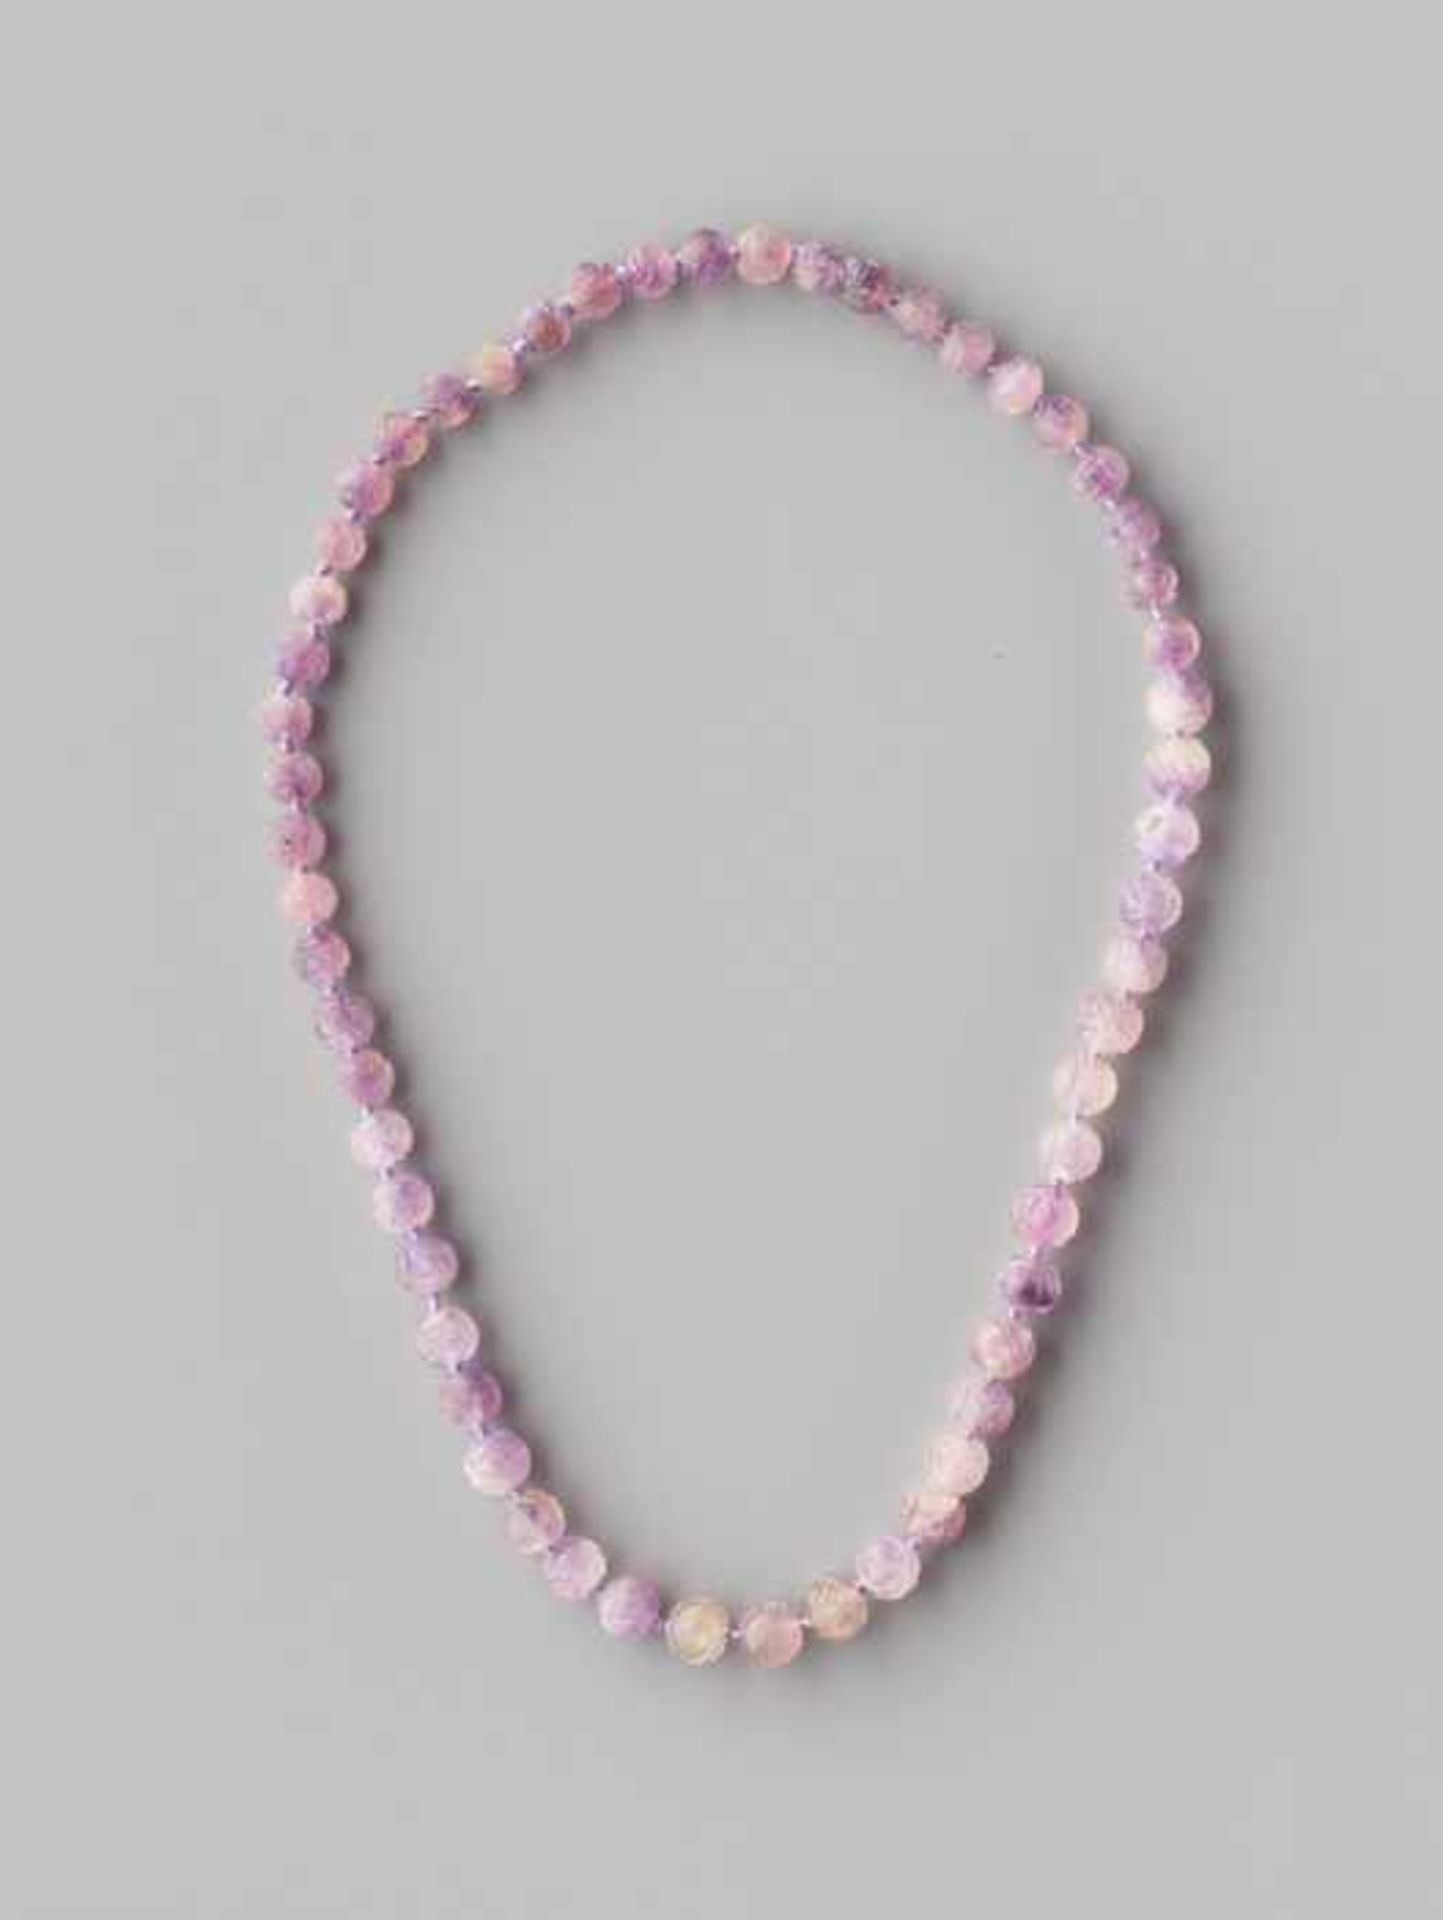 AN AMETHYST BEAD ‘SHOU’ NECKLACE, 56 BEADS, QING DYNASTY The amethyst beads with varying colors from - Image 2 of 4